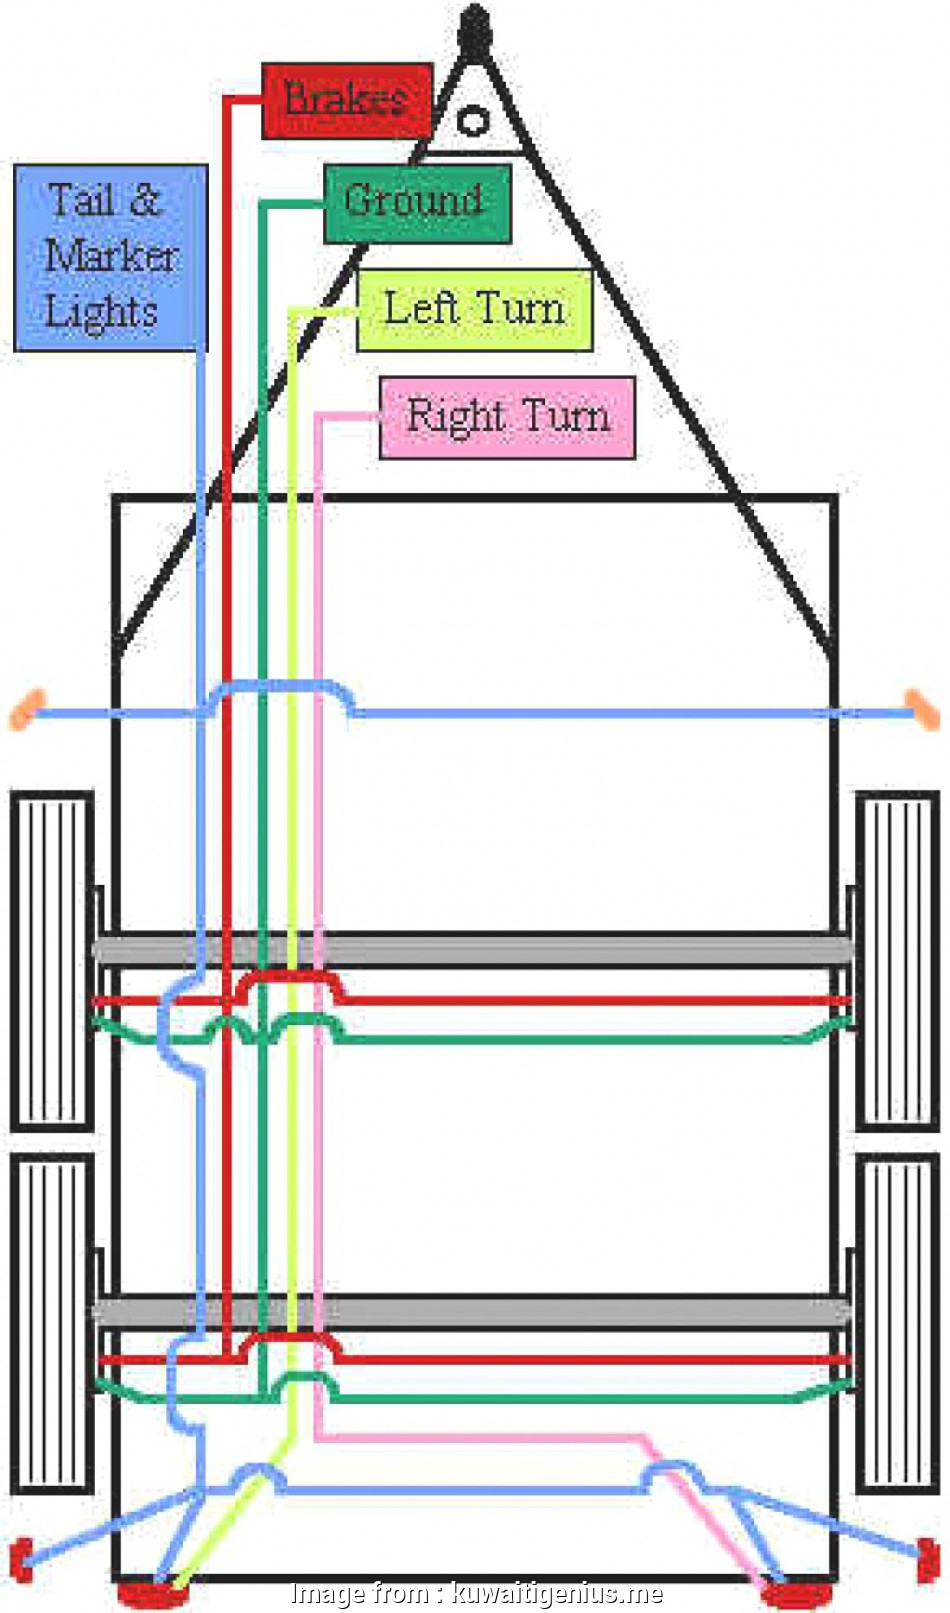 7 Blade Trailer Wiring Diagram With Brakes